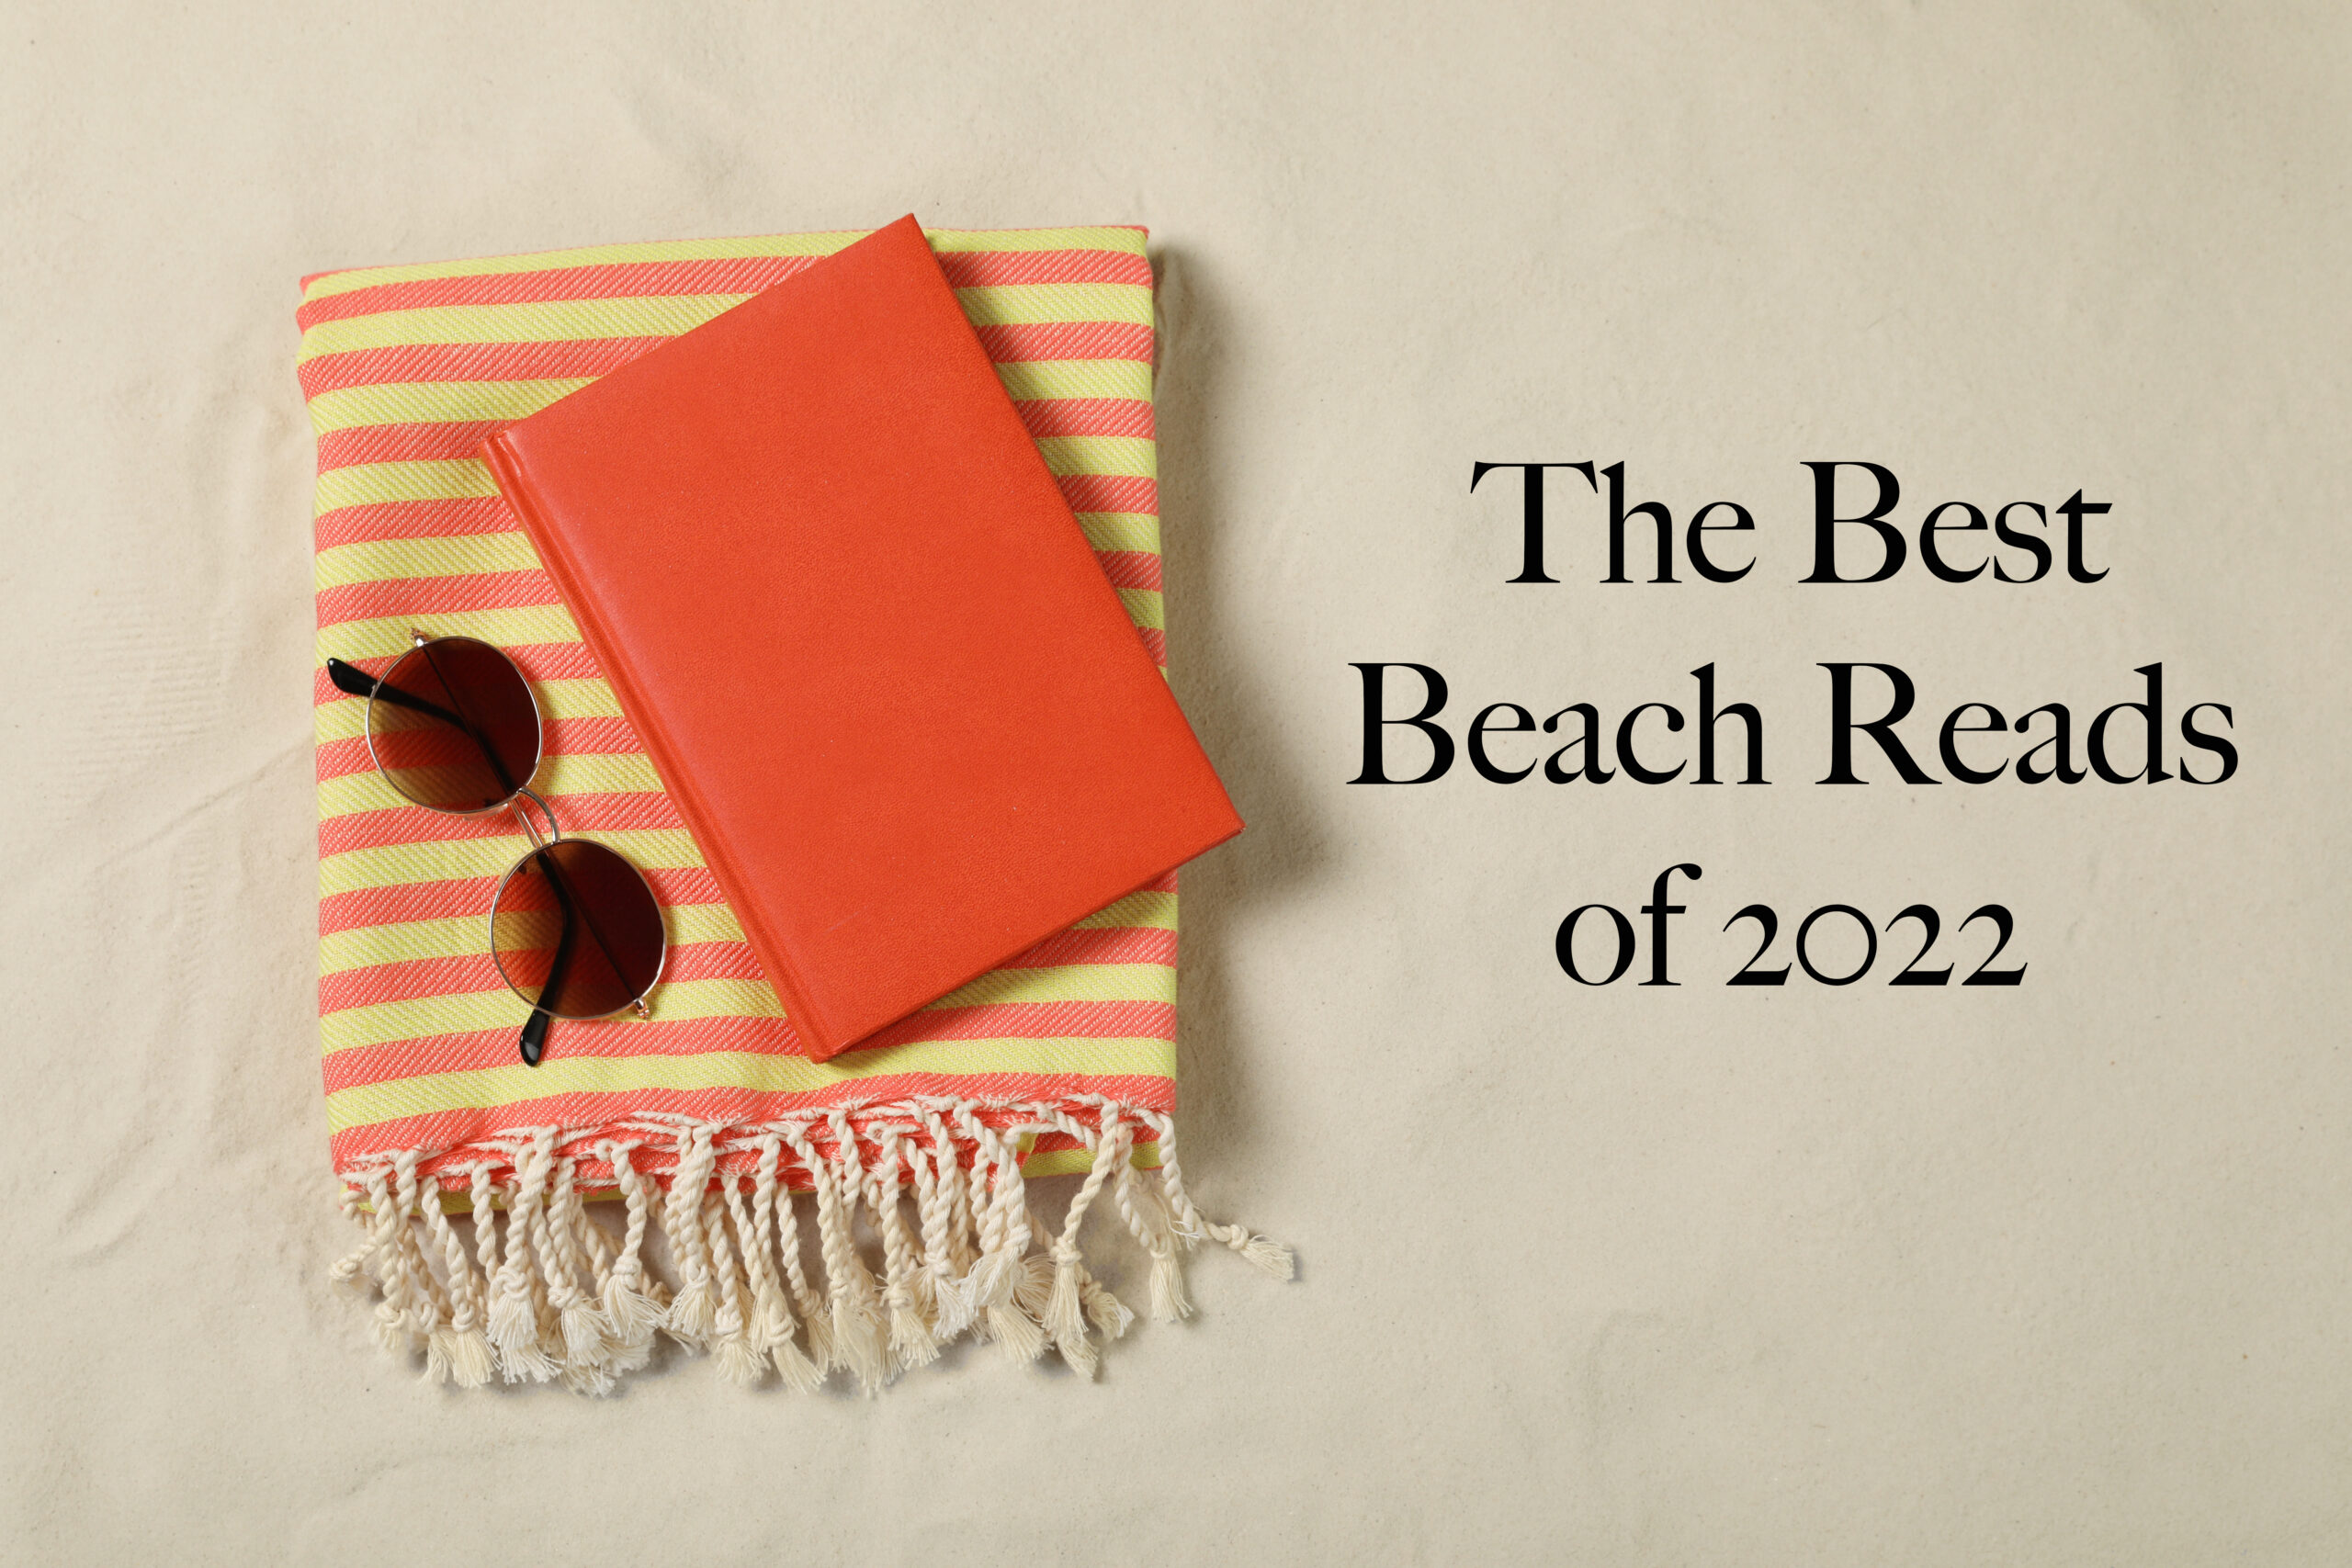 A bright orange book atop a striped beach towel with a pair of sunglasses, suggesting a perfect setup for a summer read.